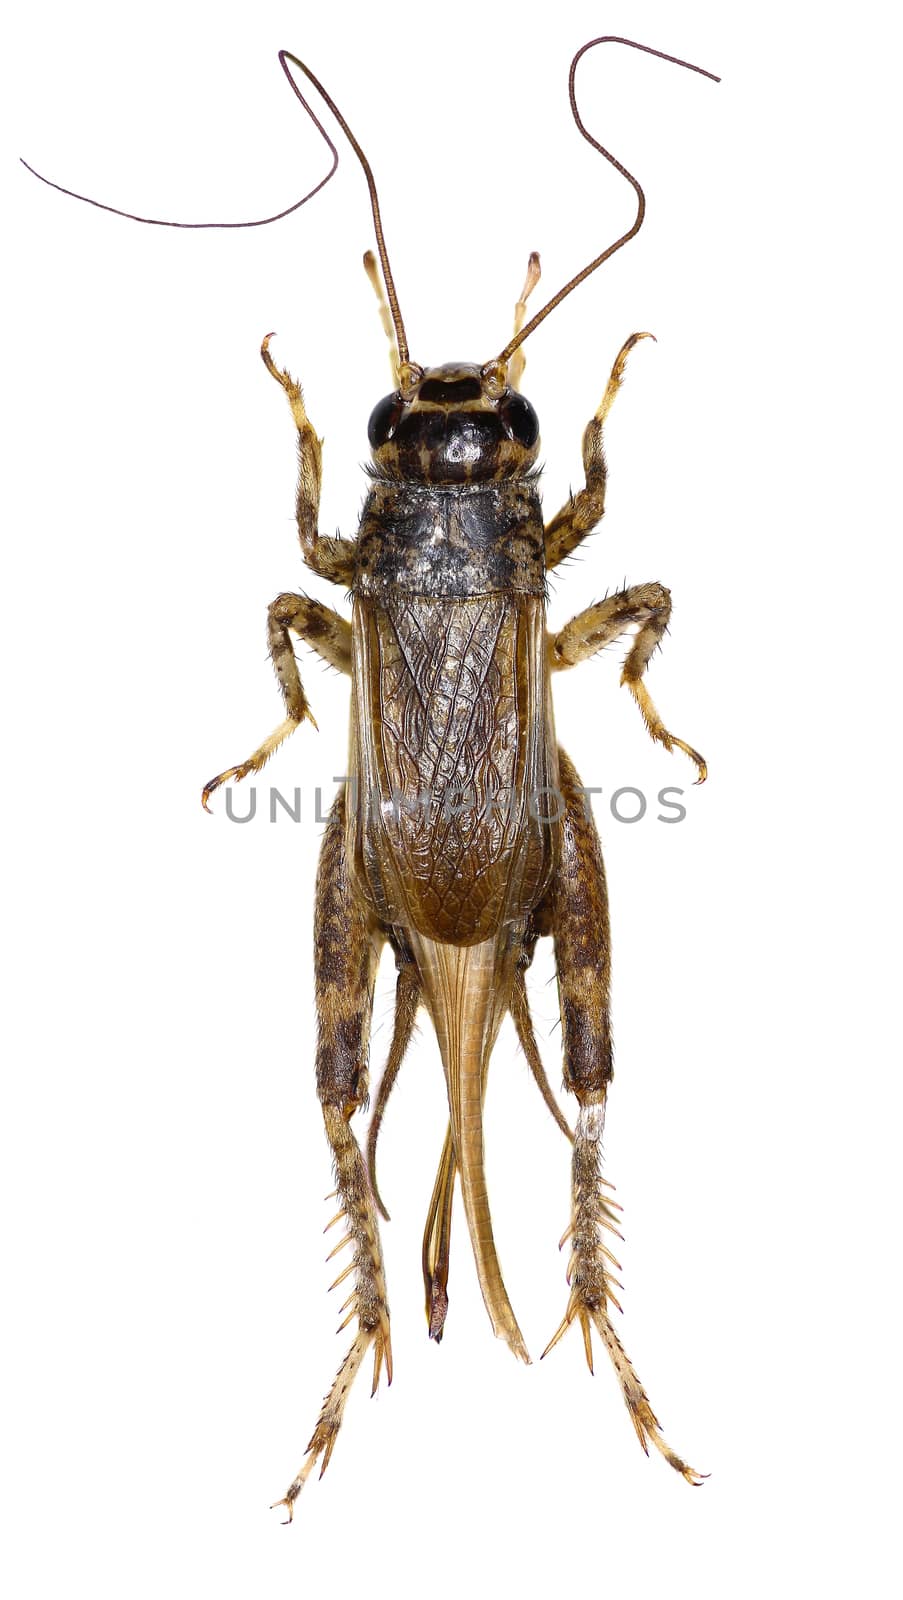 Cricket (insect) on white Background  -  Eumodicogryllus bordigalensis (Latreille, 1804) by gstalker